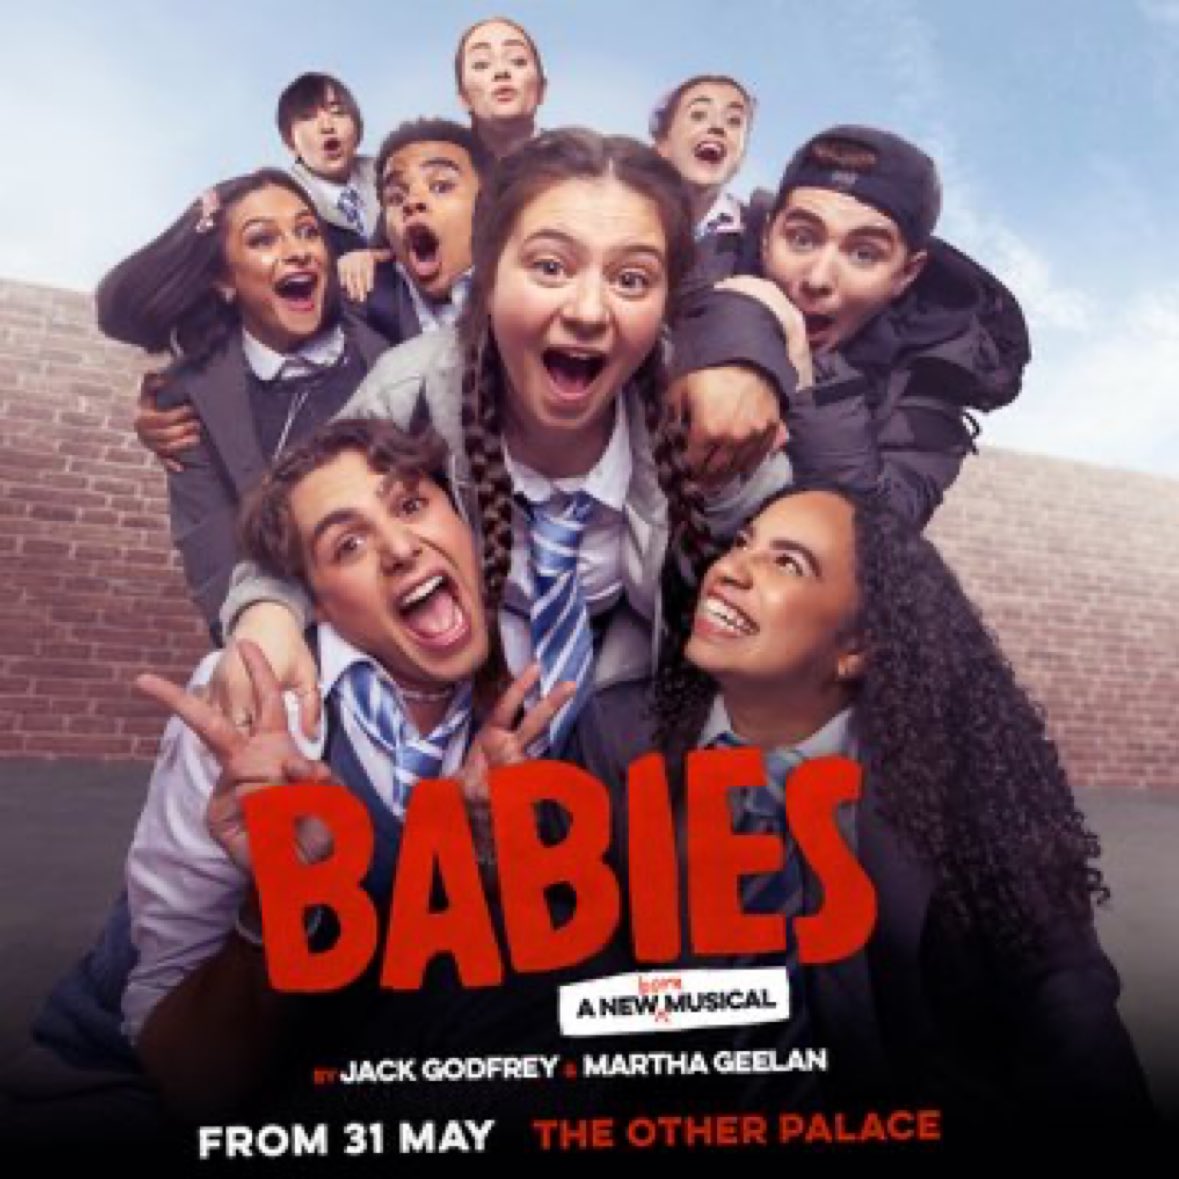 Fans of Breeders (and also others)! Our beloved Ava Mk III, Zoë Athena, is starring in this new musical at @TheOtherPalace from 31st May to 14th July. Go see her! She’s simply aces.